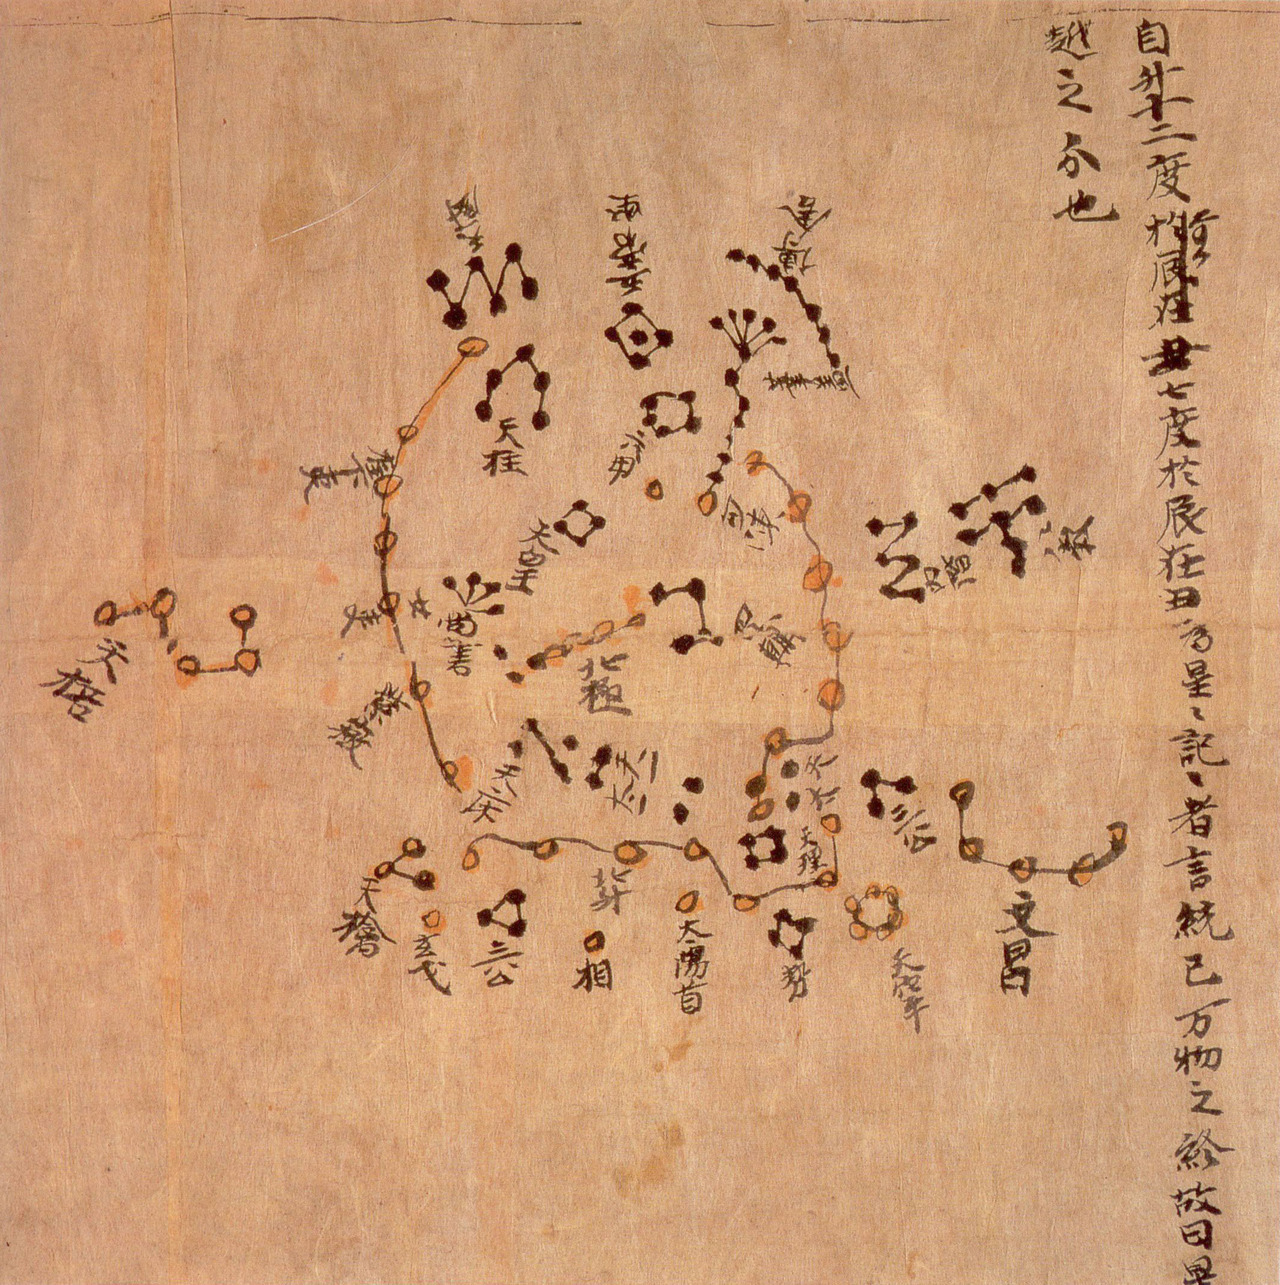 Dunhuang Star Chart, c. AD 649–684